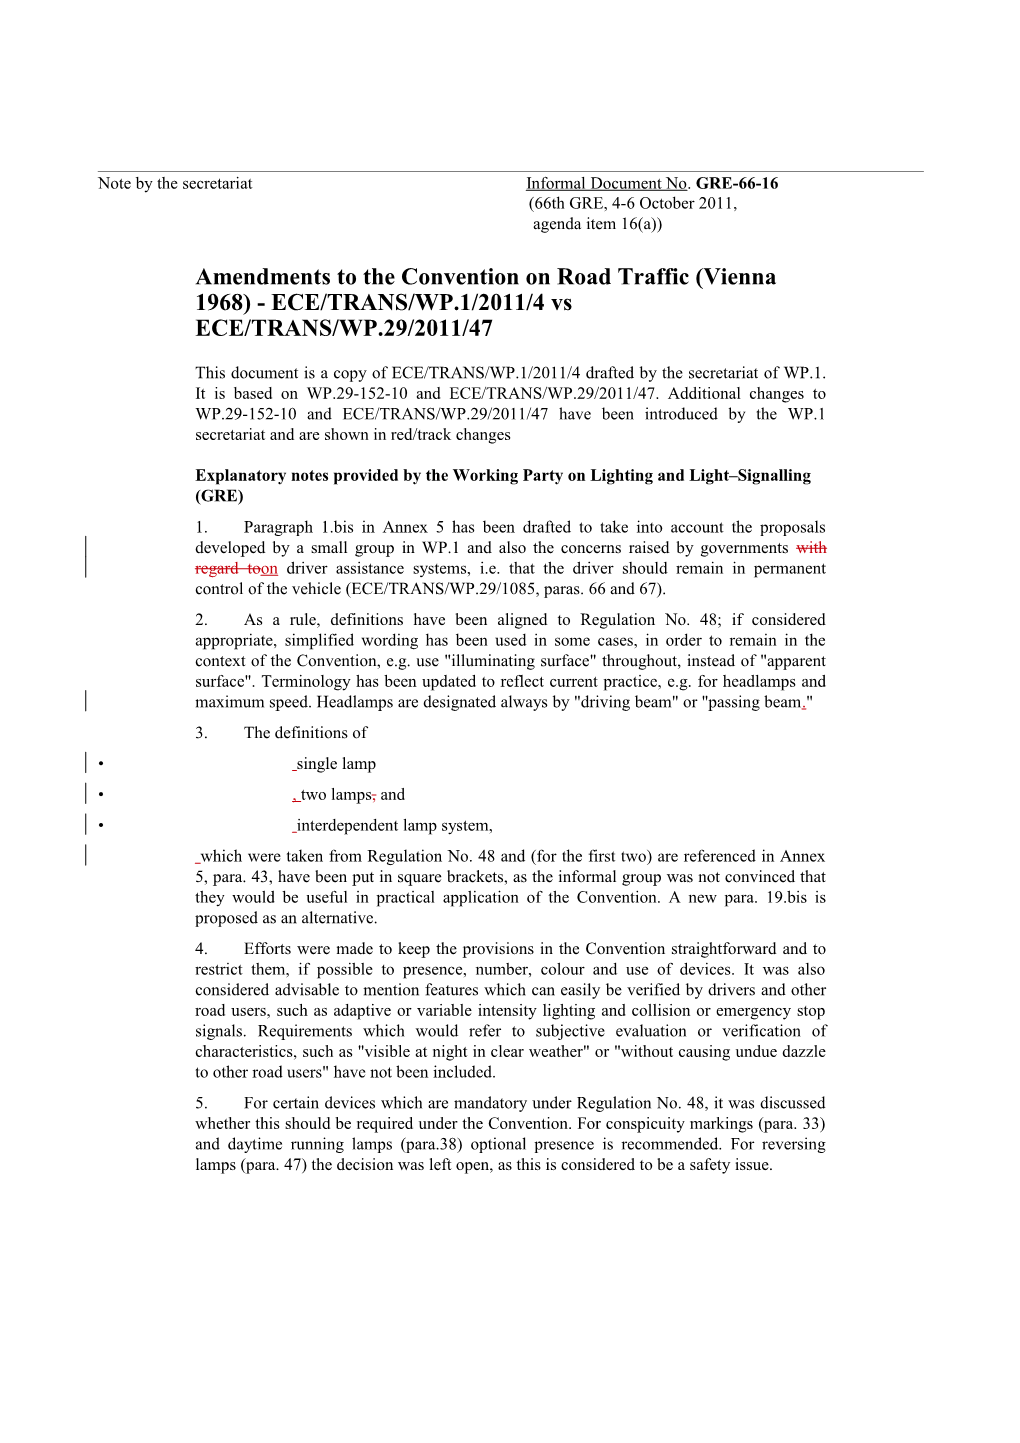 Amendments to the Convention on Road Traffic (Vienna 1968) -ECE/TRANS/WP.1/2011/4 Vs